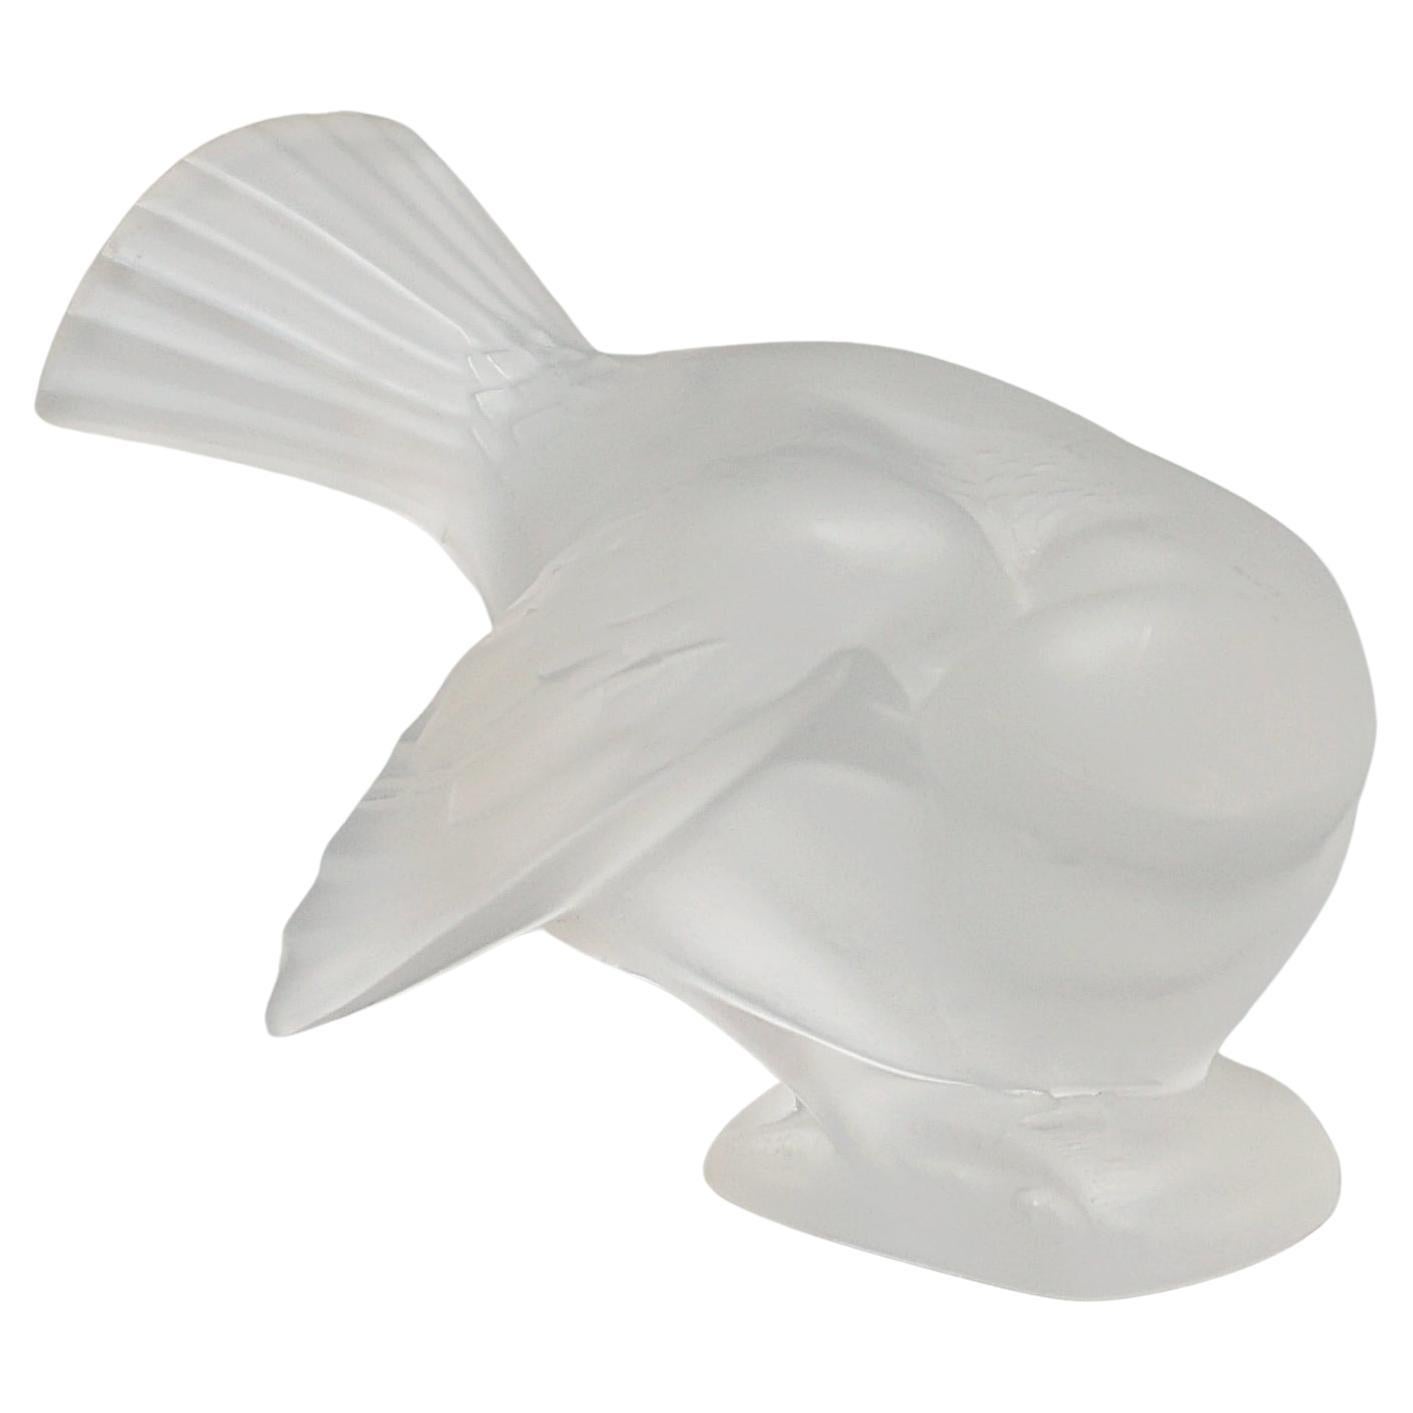 'Moineau Coquet' A Glass Bird Paperweight by Marc Lalique (1900 - 1977) For Sale